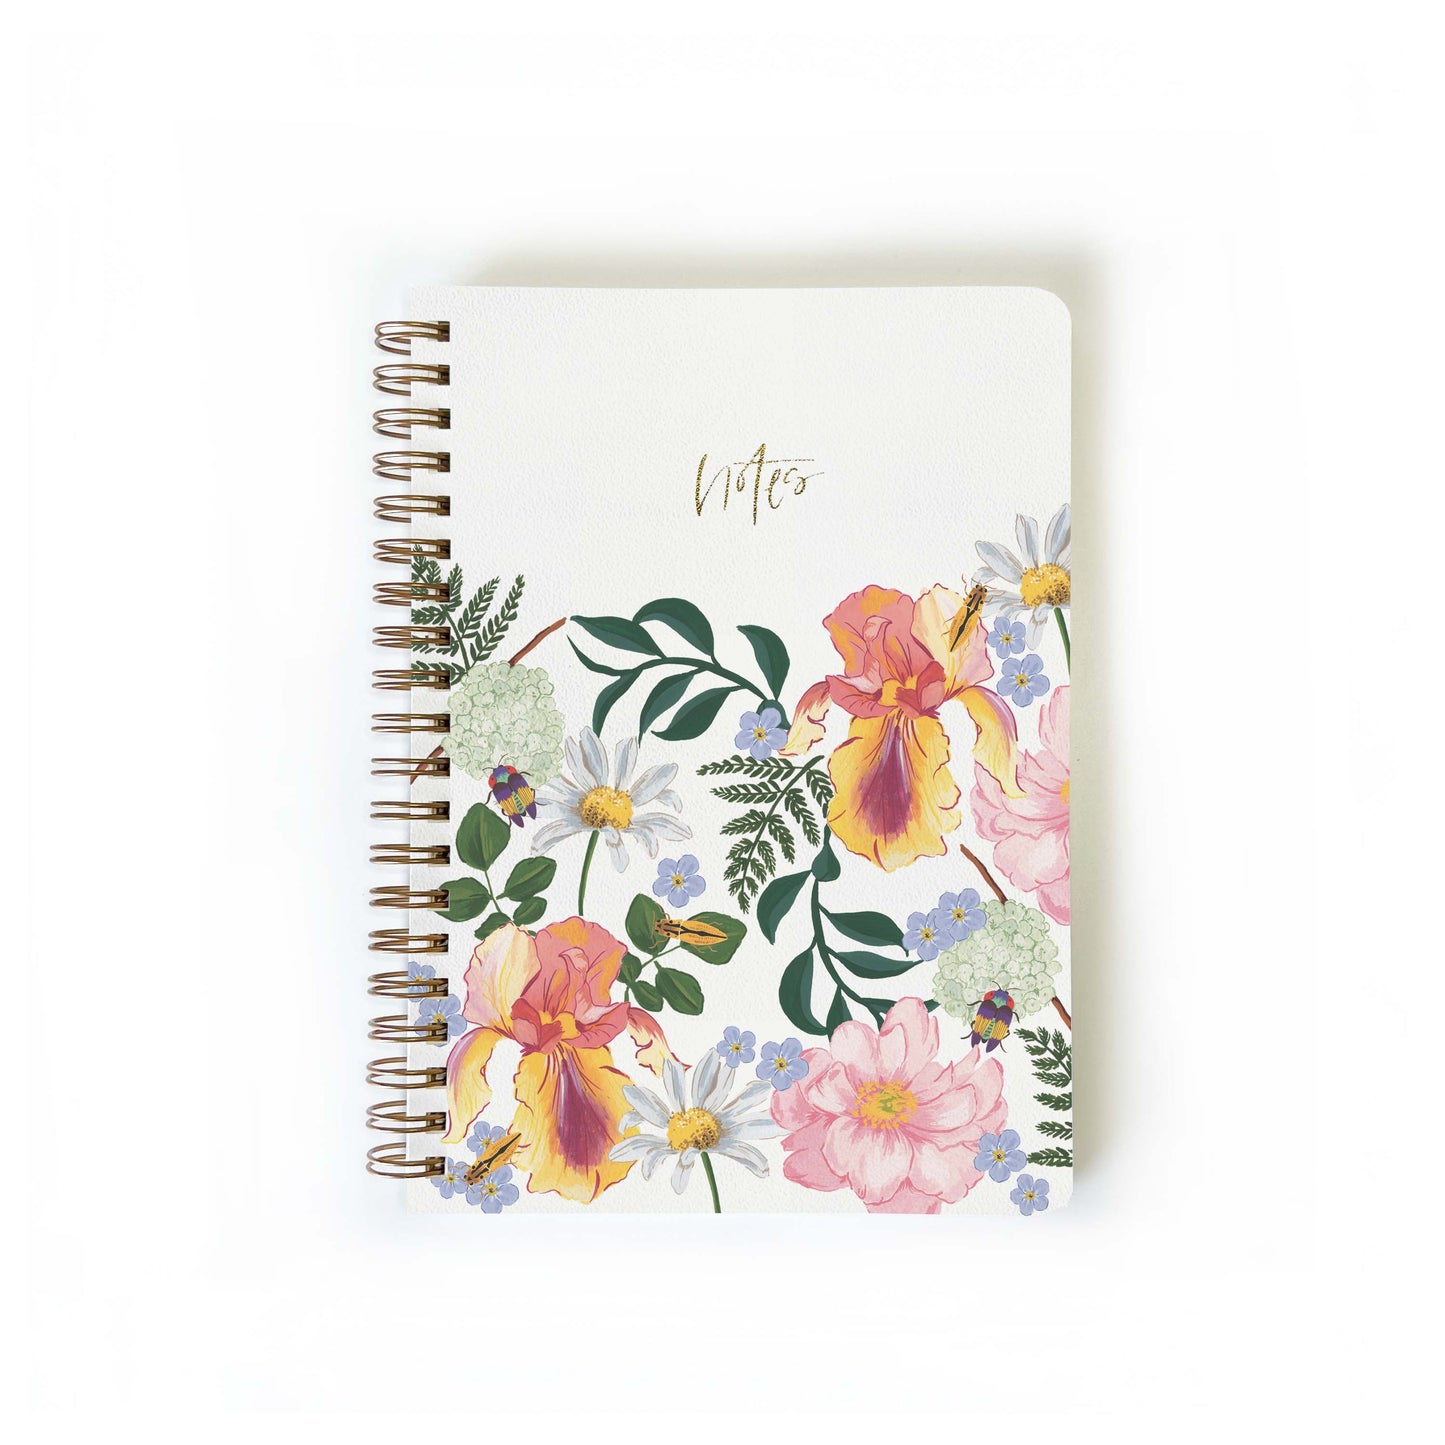 Iris Floral Notebook | 5x7 Journal | Blank Pages